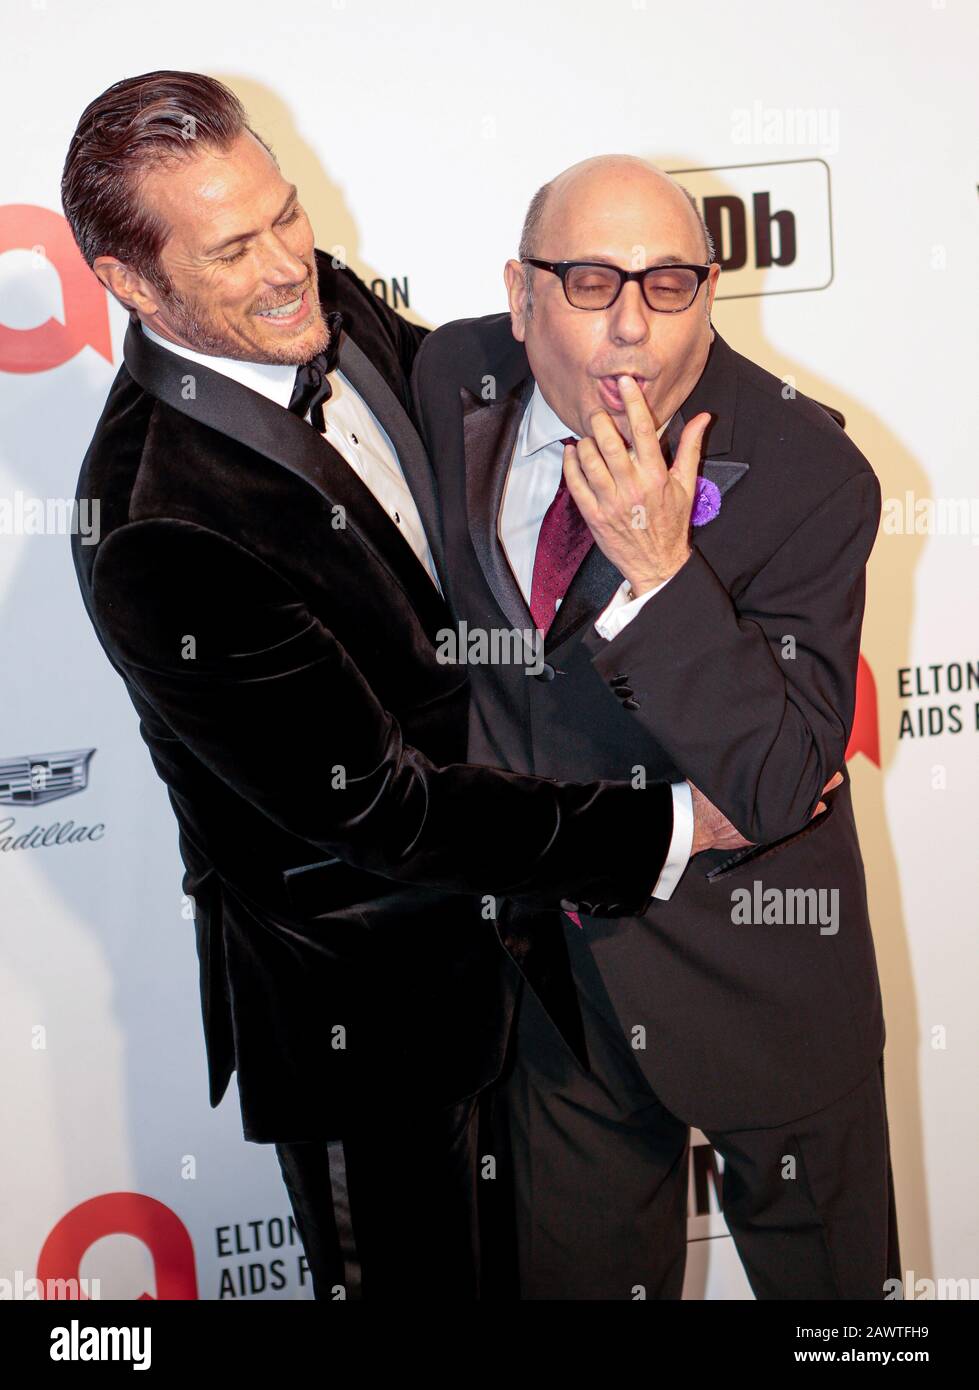 Jason Lewis and Willie Garson attending the Elton John AIDS Foundation Viewing Party held at West Hollywood Park, Los Angeles, California, USA. Stock Photo